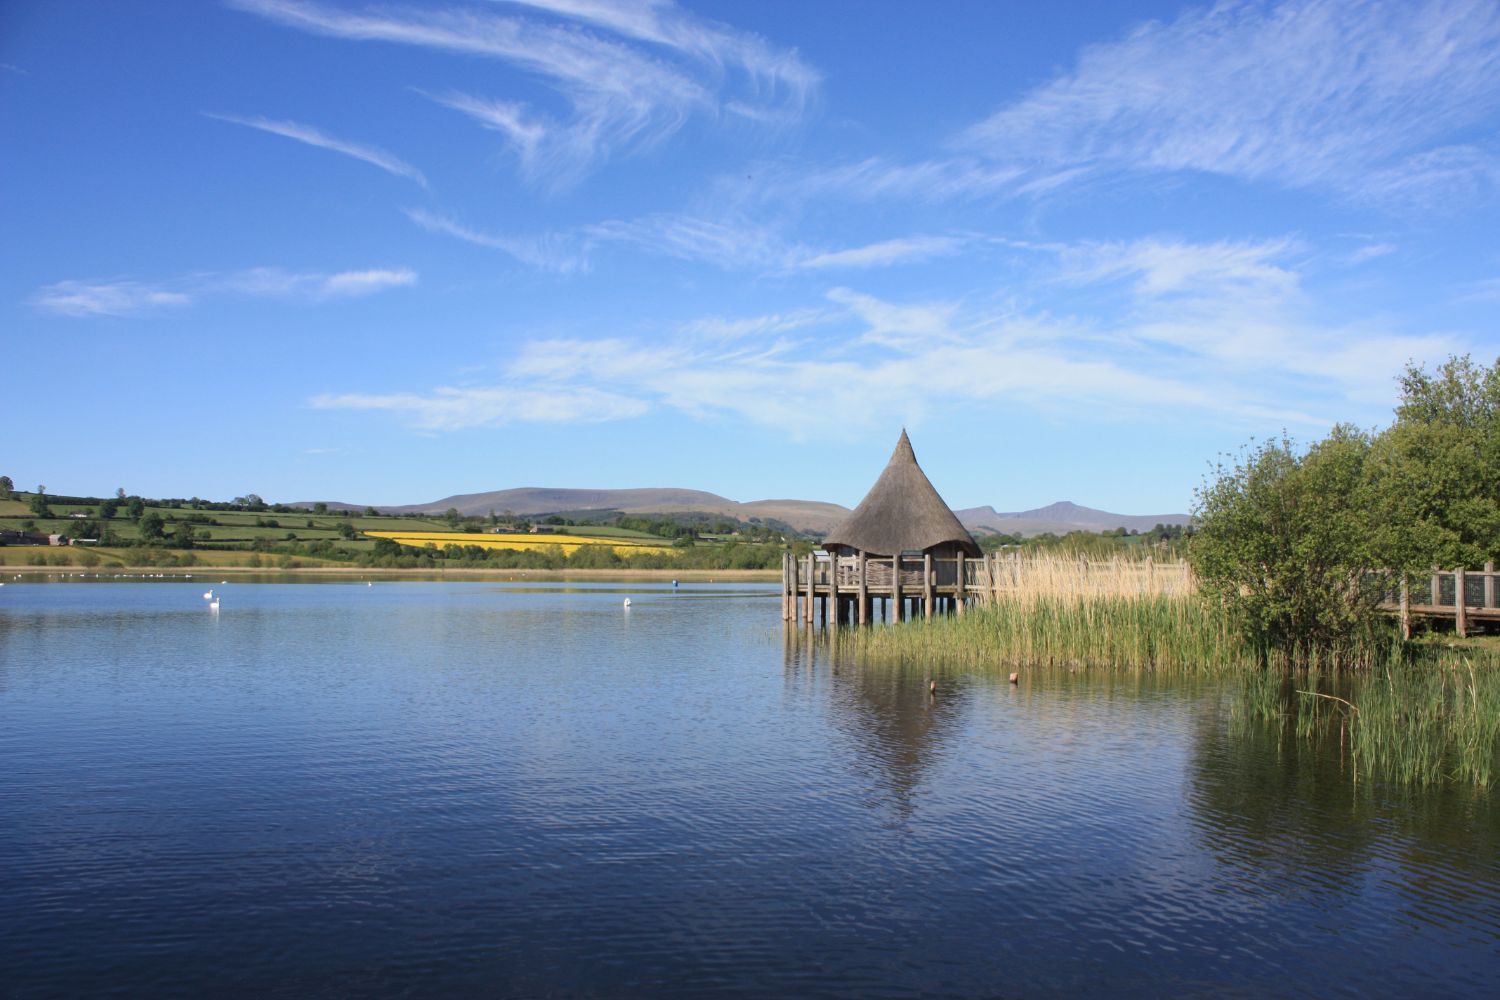 Hut next to lake with mountains and blue sky in background, Brecon Beacons 